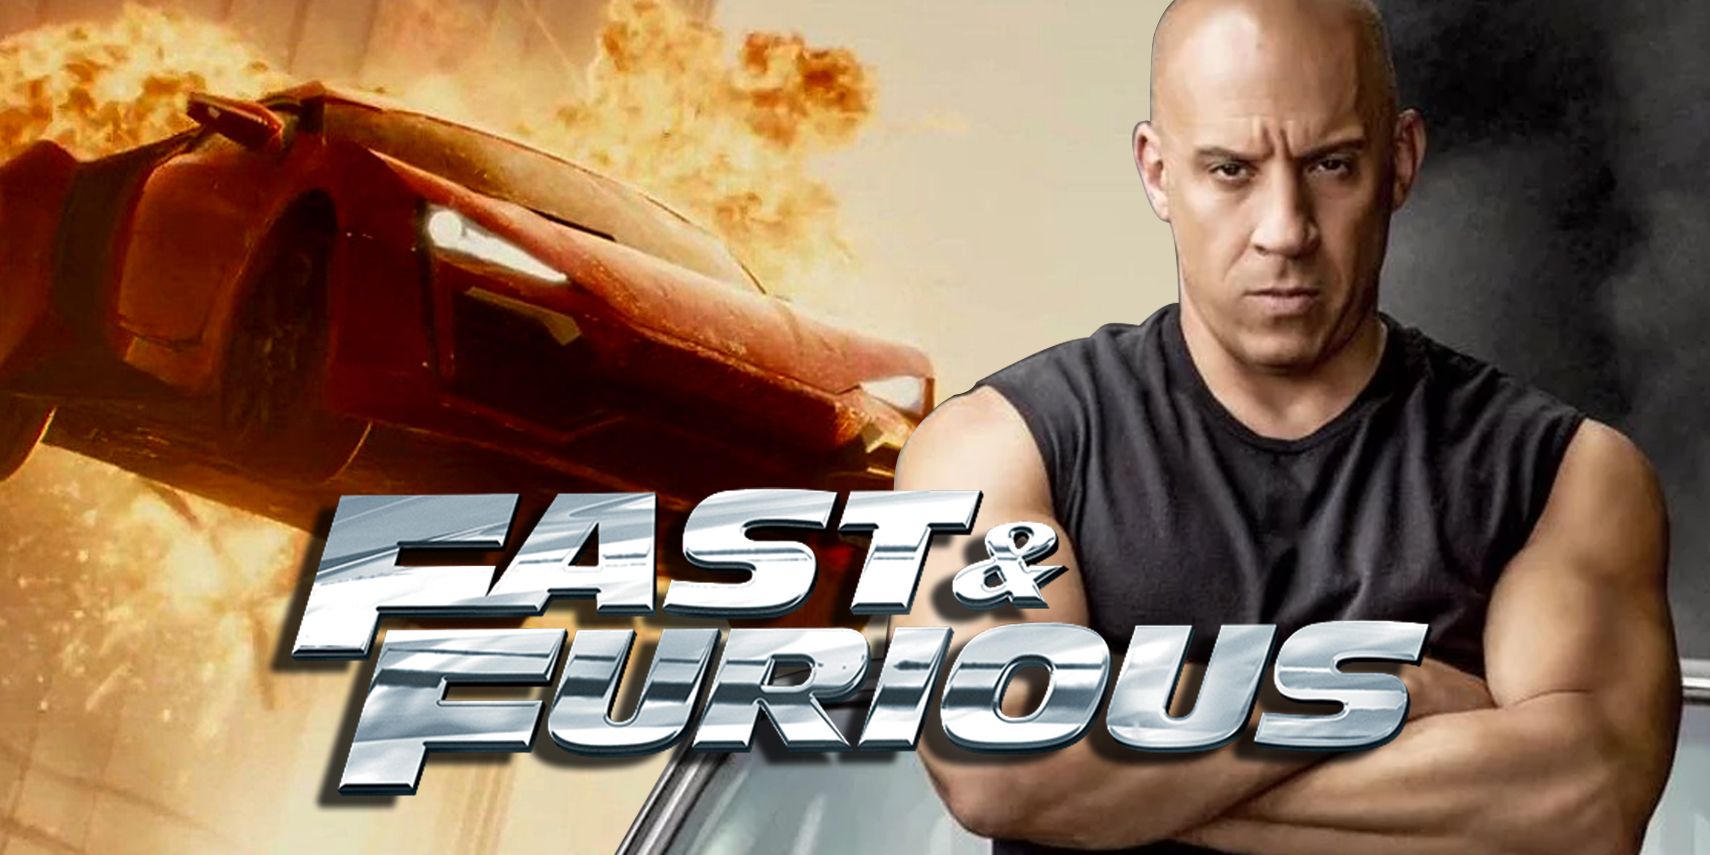 insanity fast and furious download